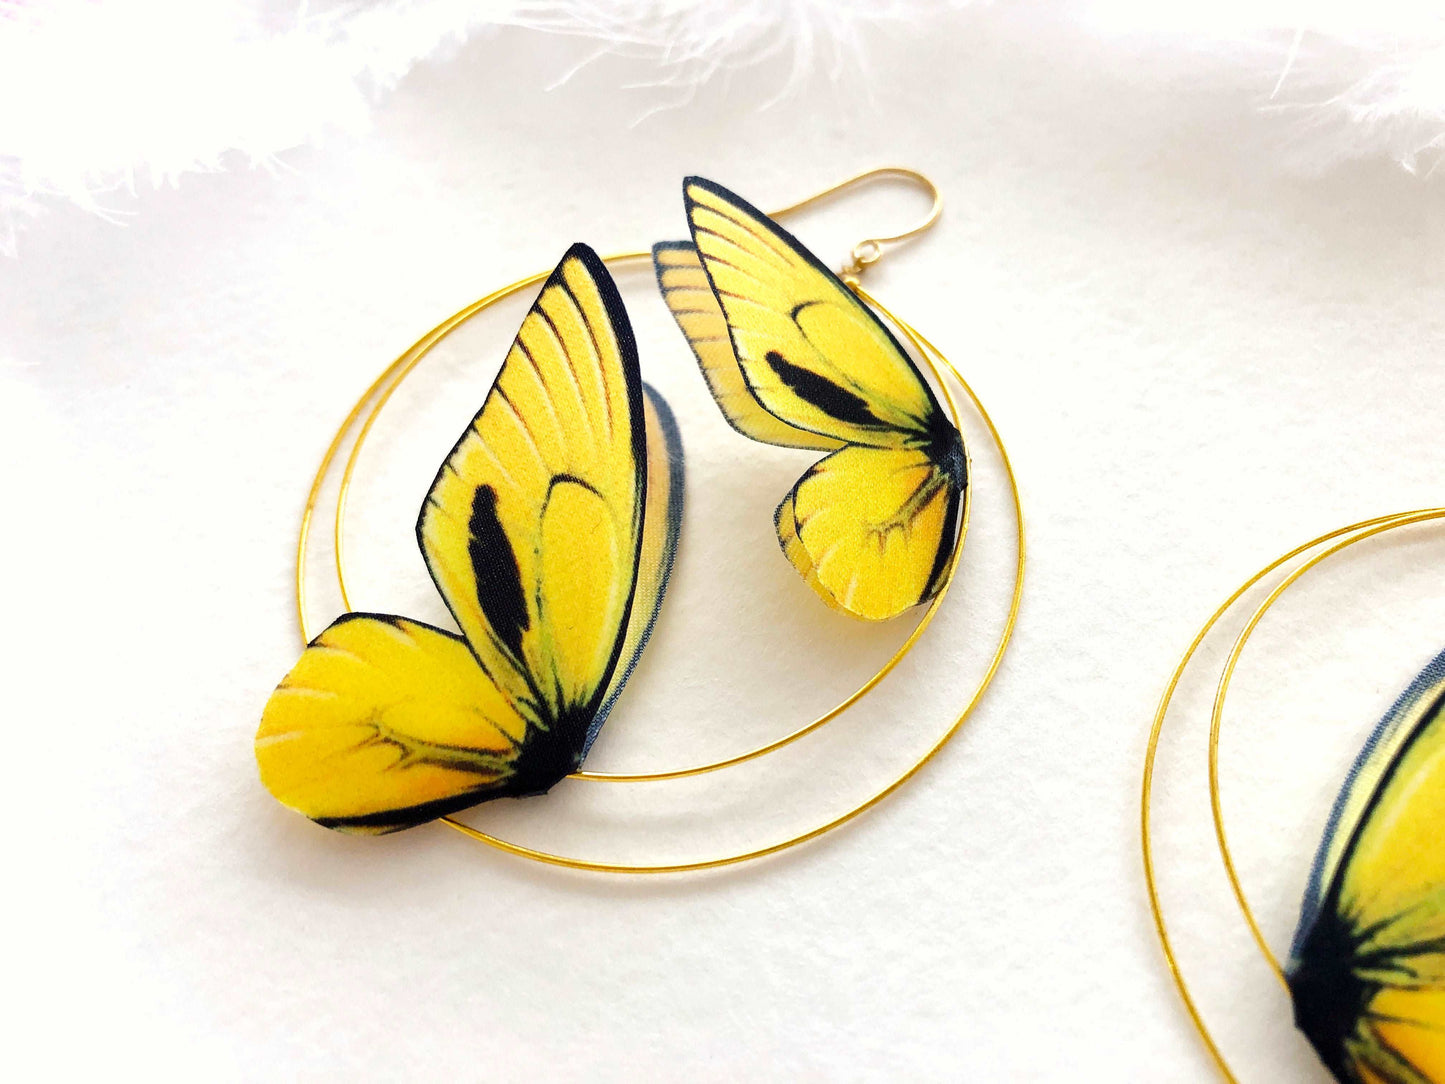 Hoop Earrings with Yellow Butterflies on White Background